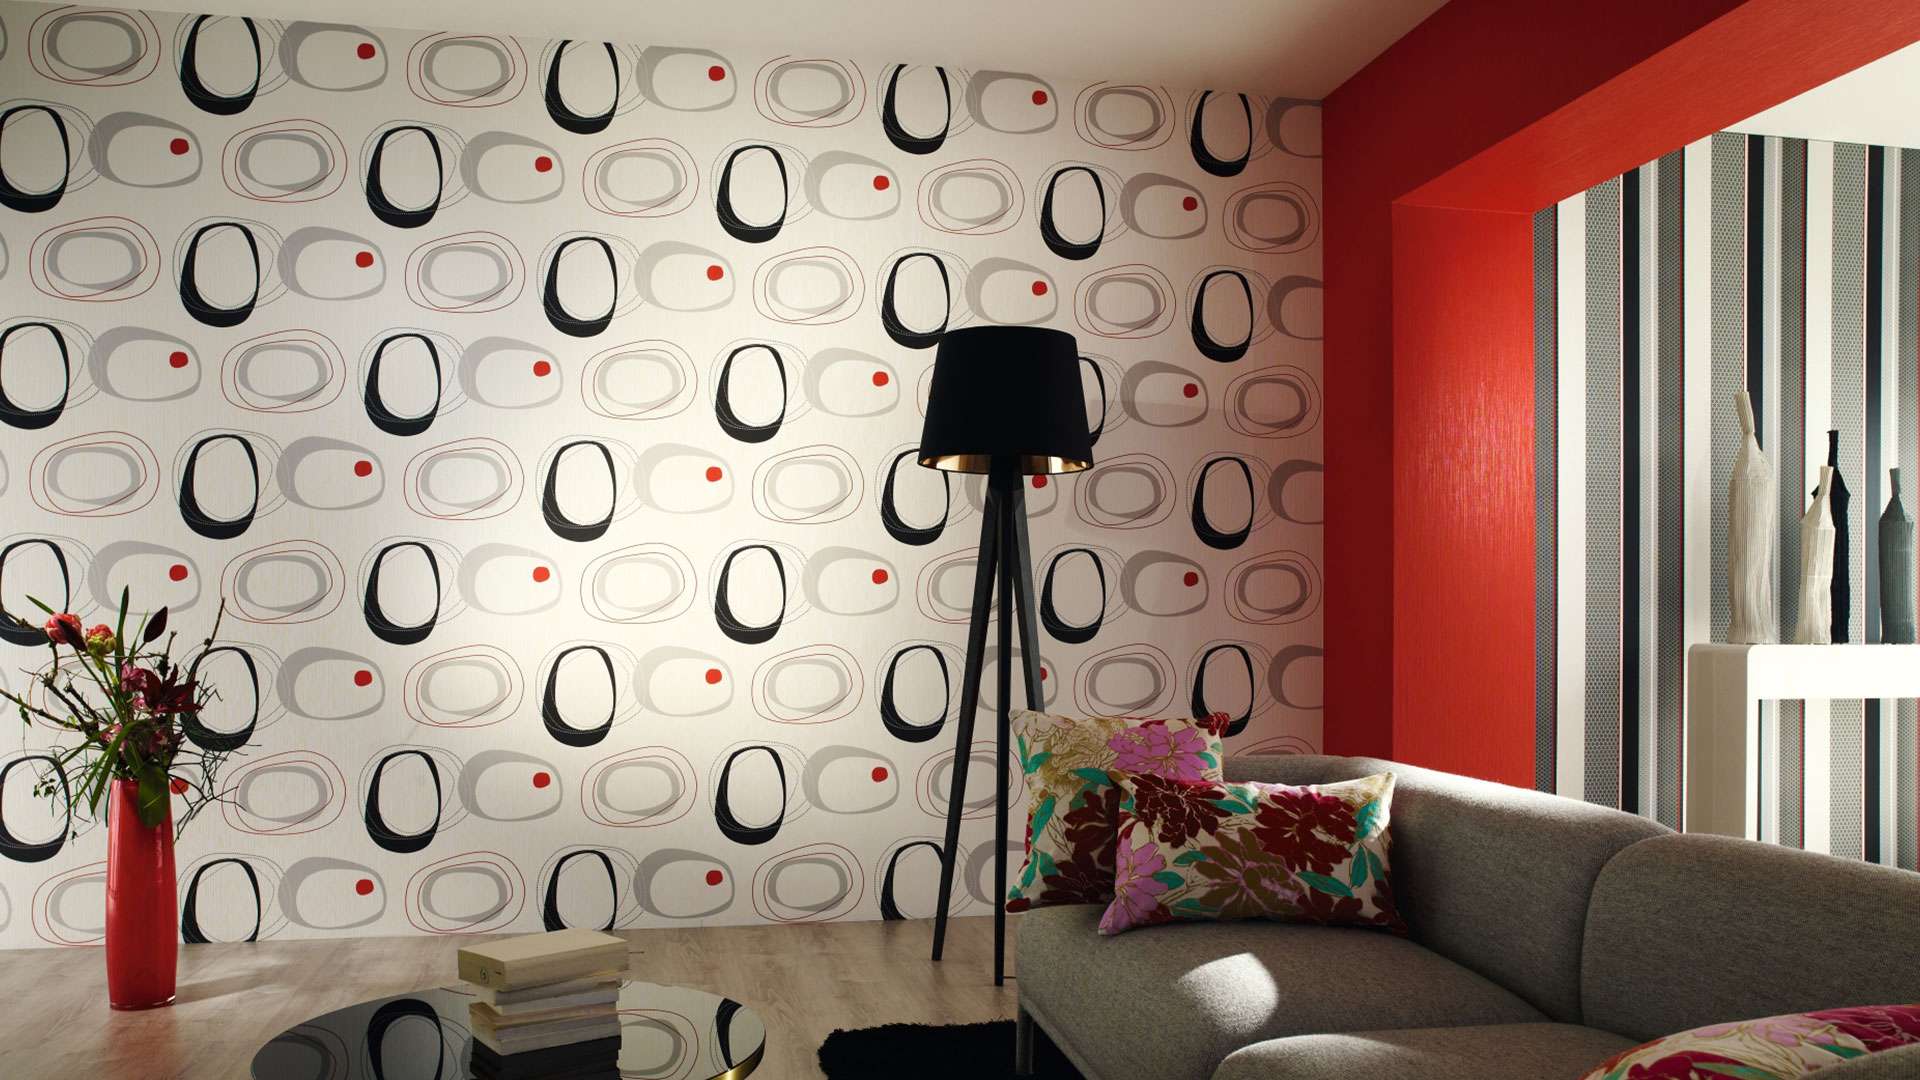 Wallpaper Ideas For Home Office